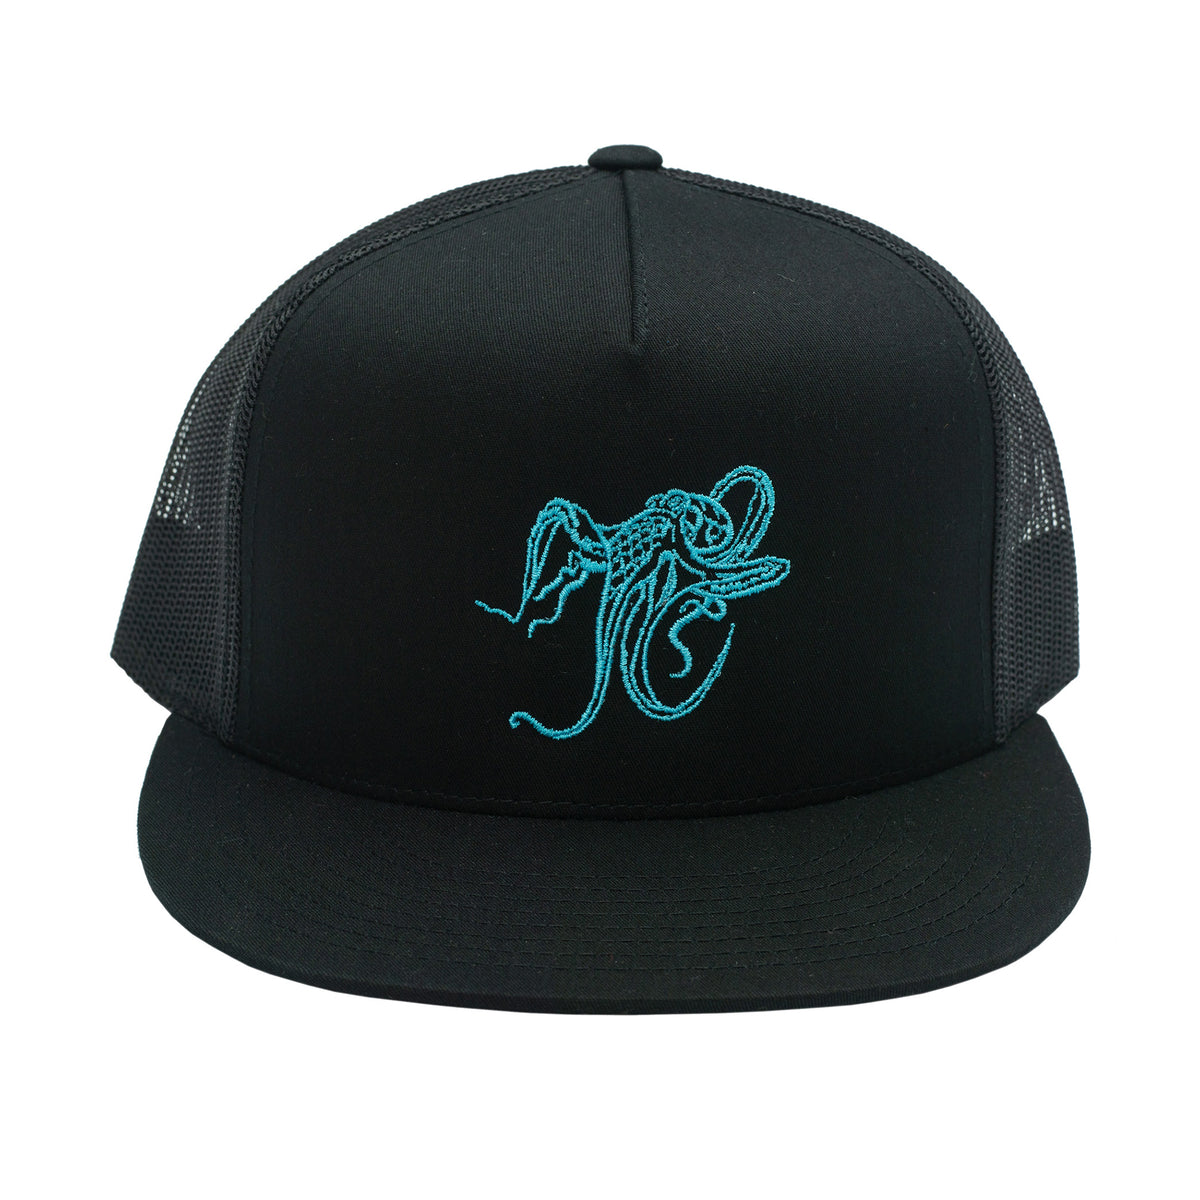 Giant Pacific Octopus Trucker Hat in Black with Blue Embroidery